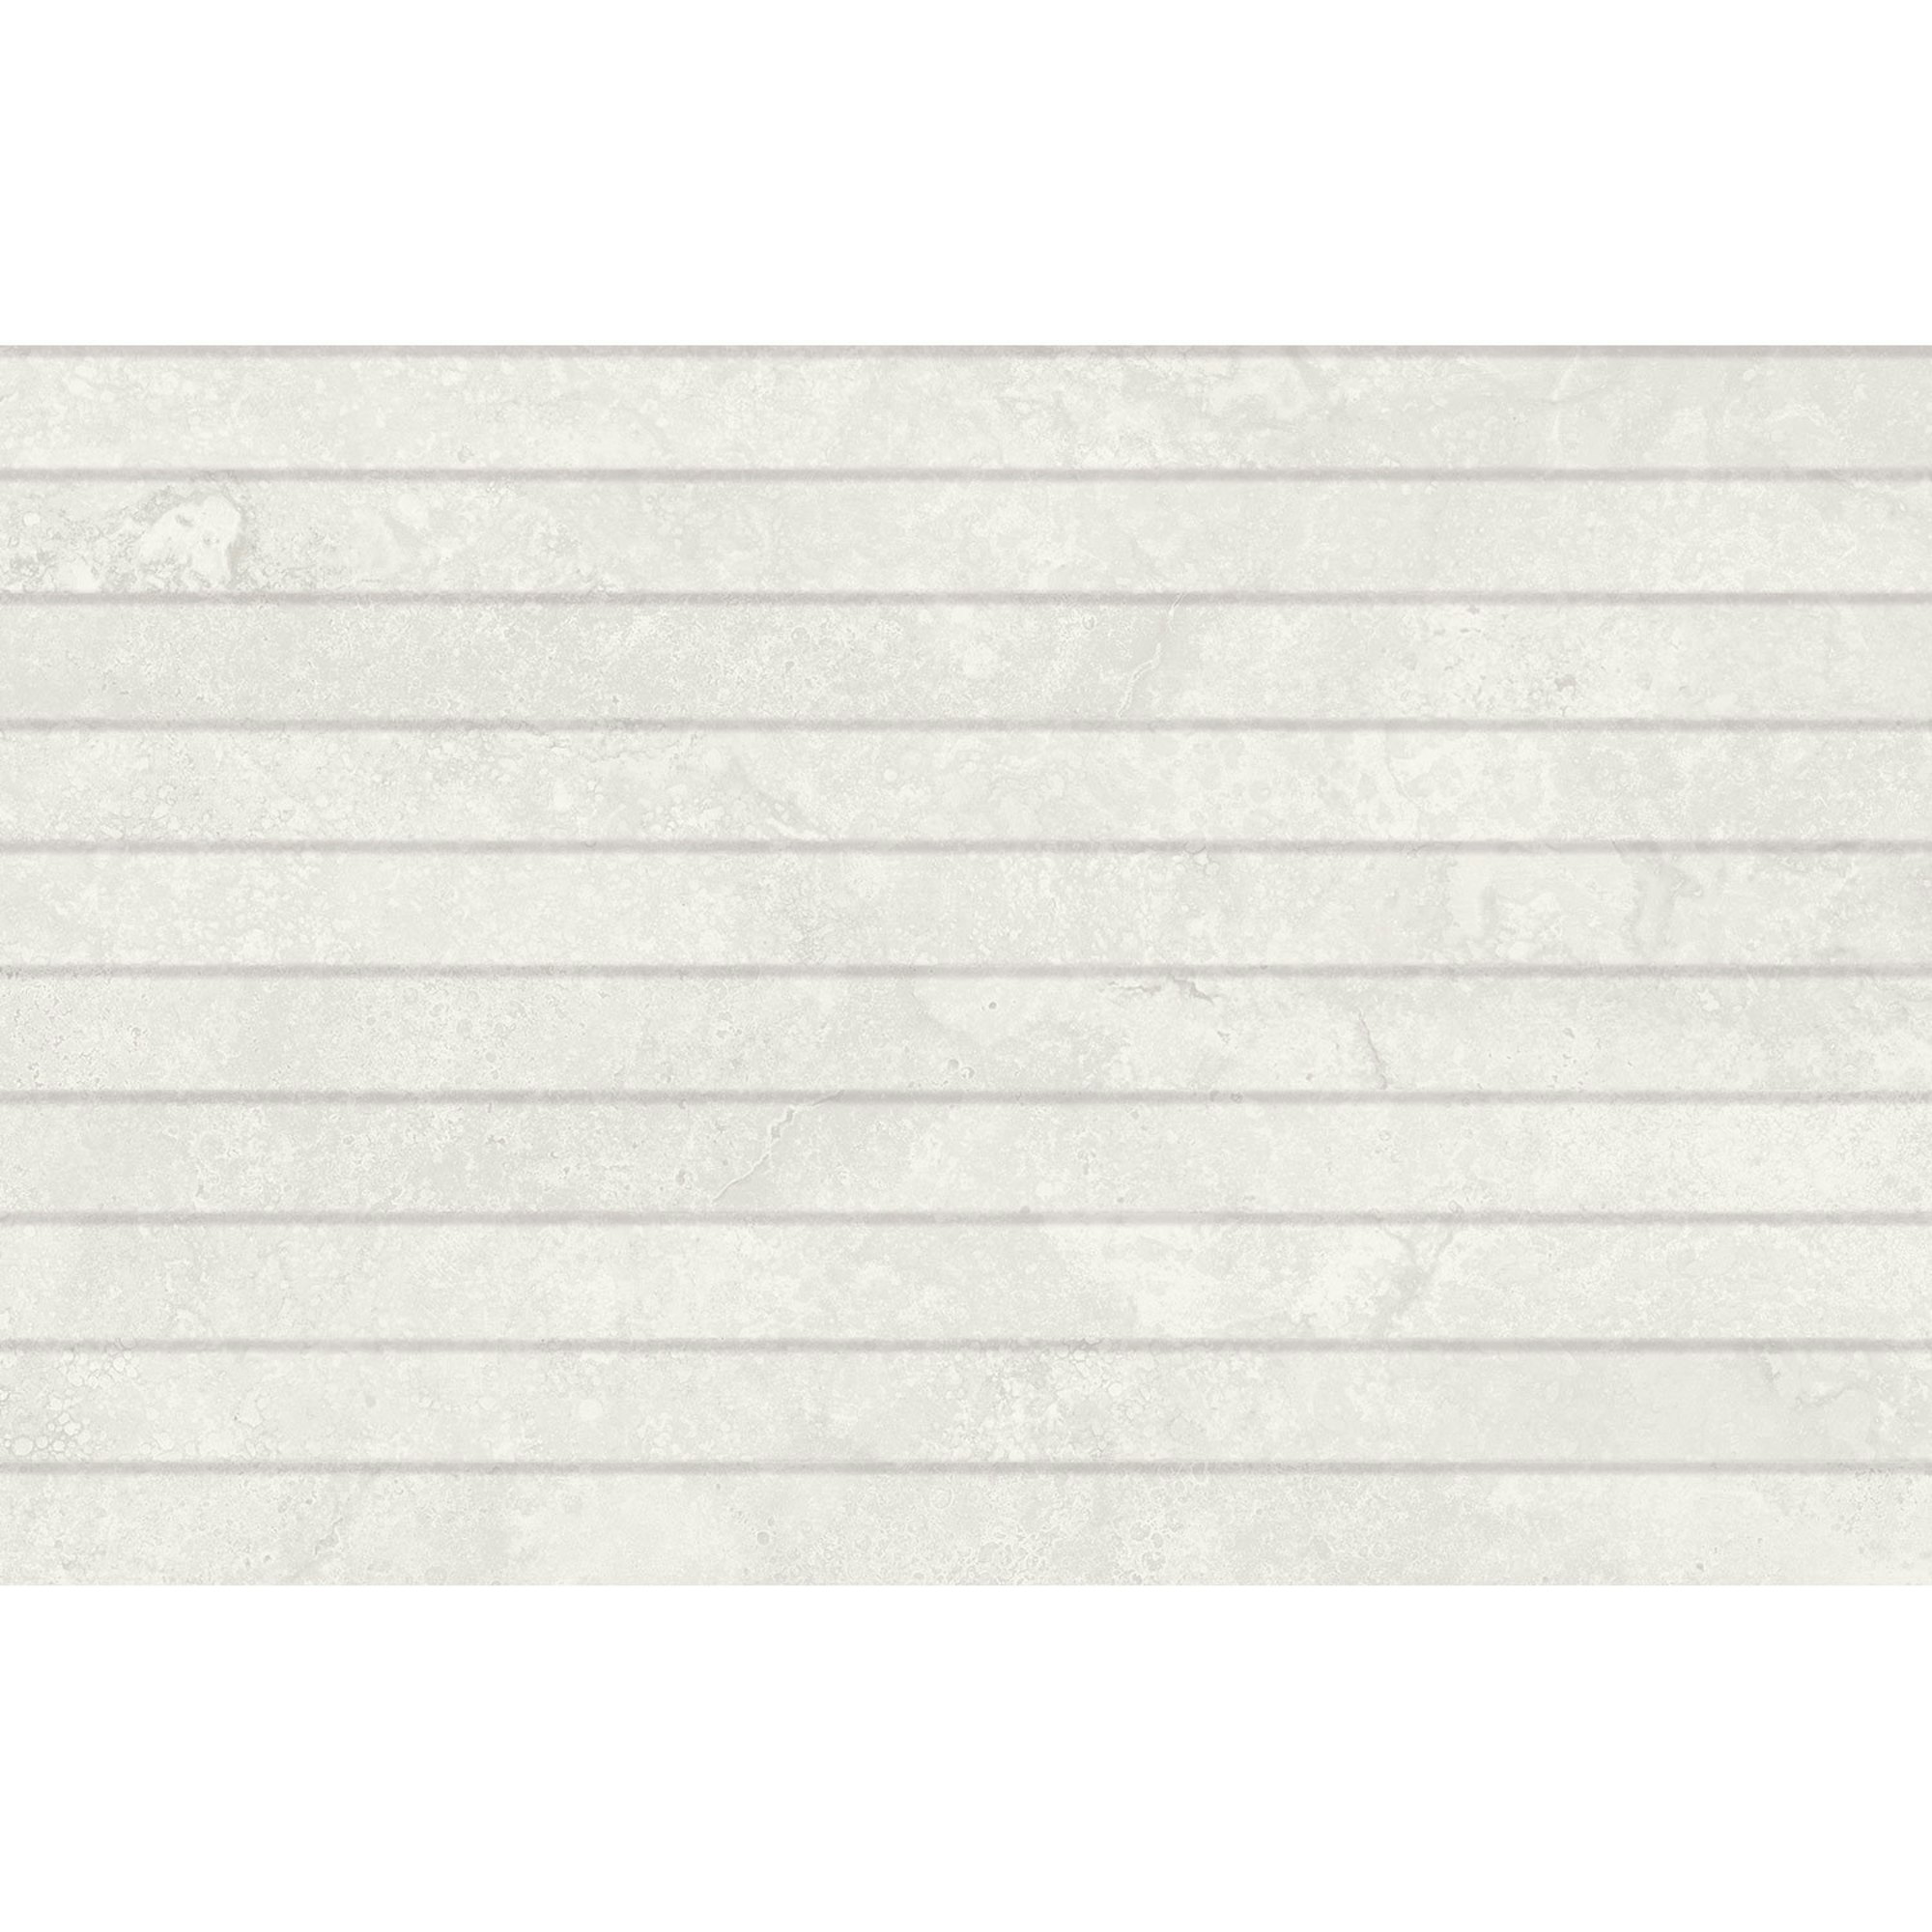 Essential White Carved Decor Wall Tile